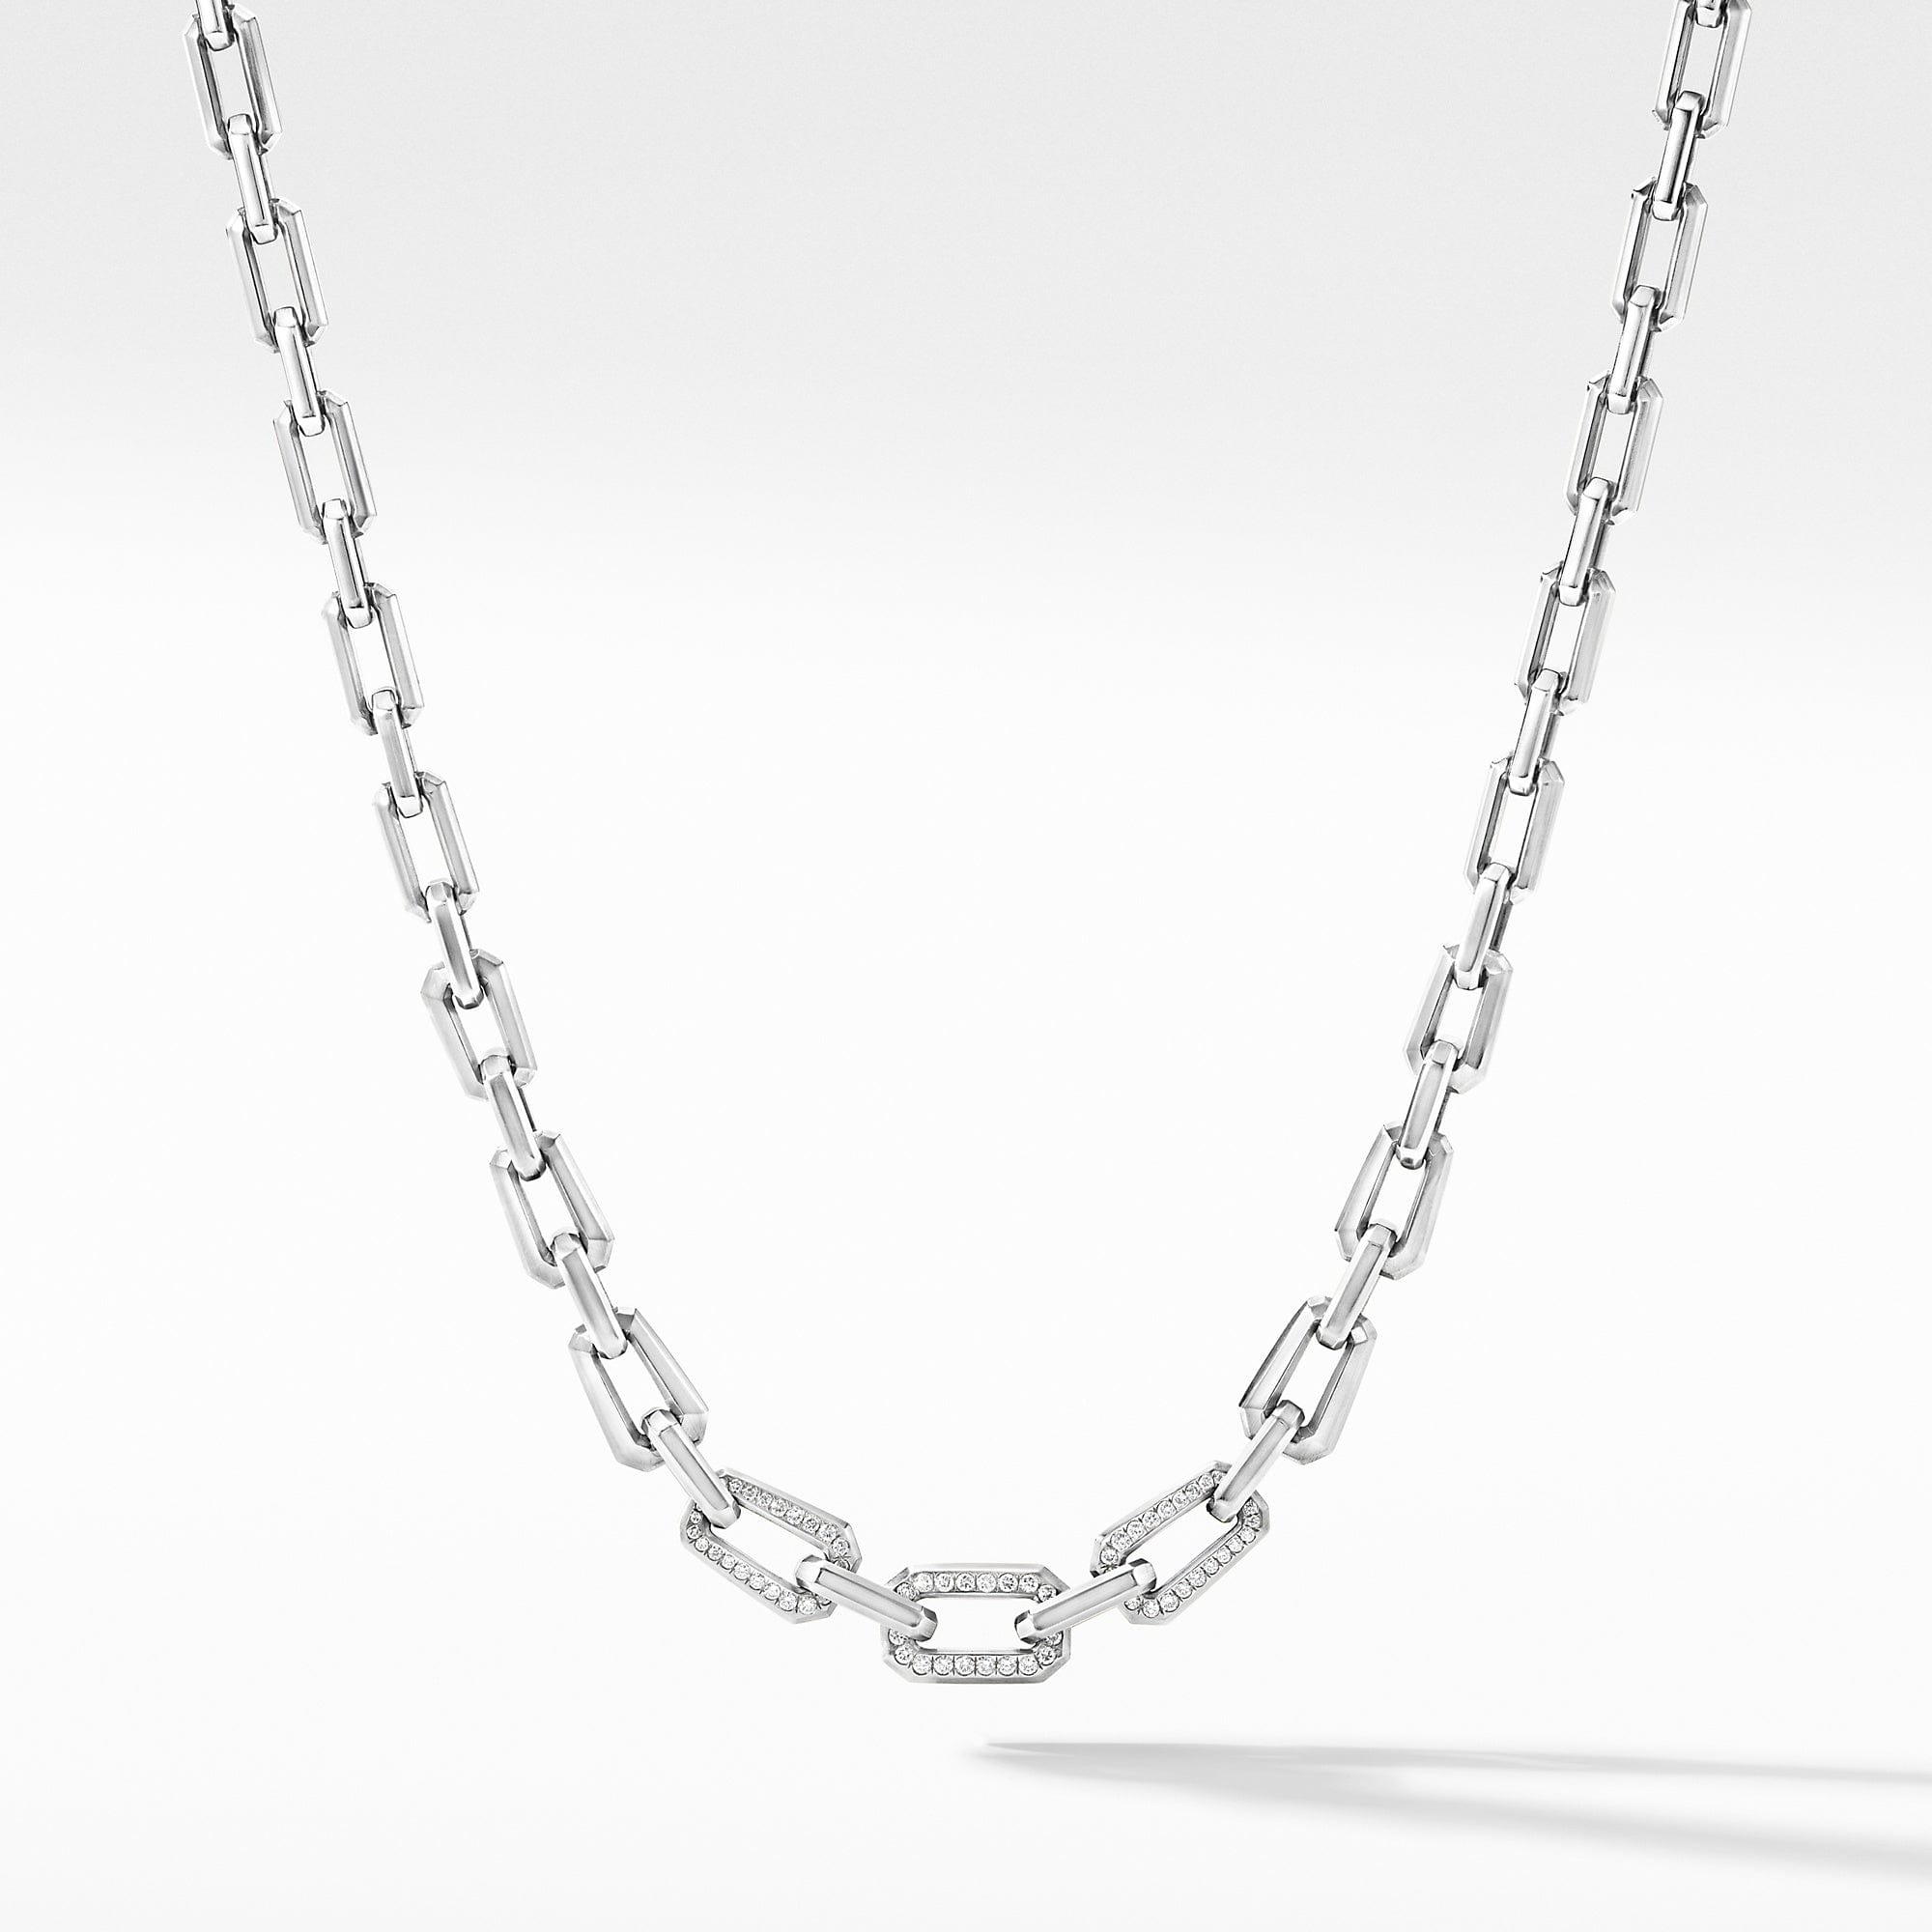 Novella Chain Necklace with Pavé Diamonds, Long's Jewelers